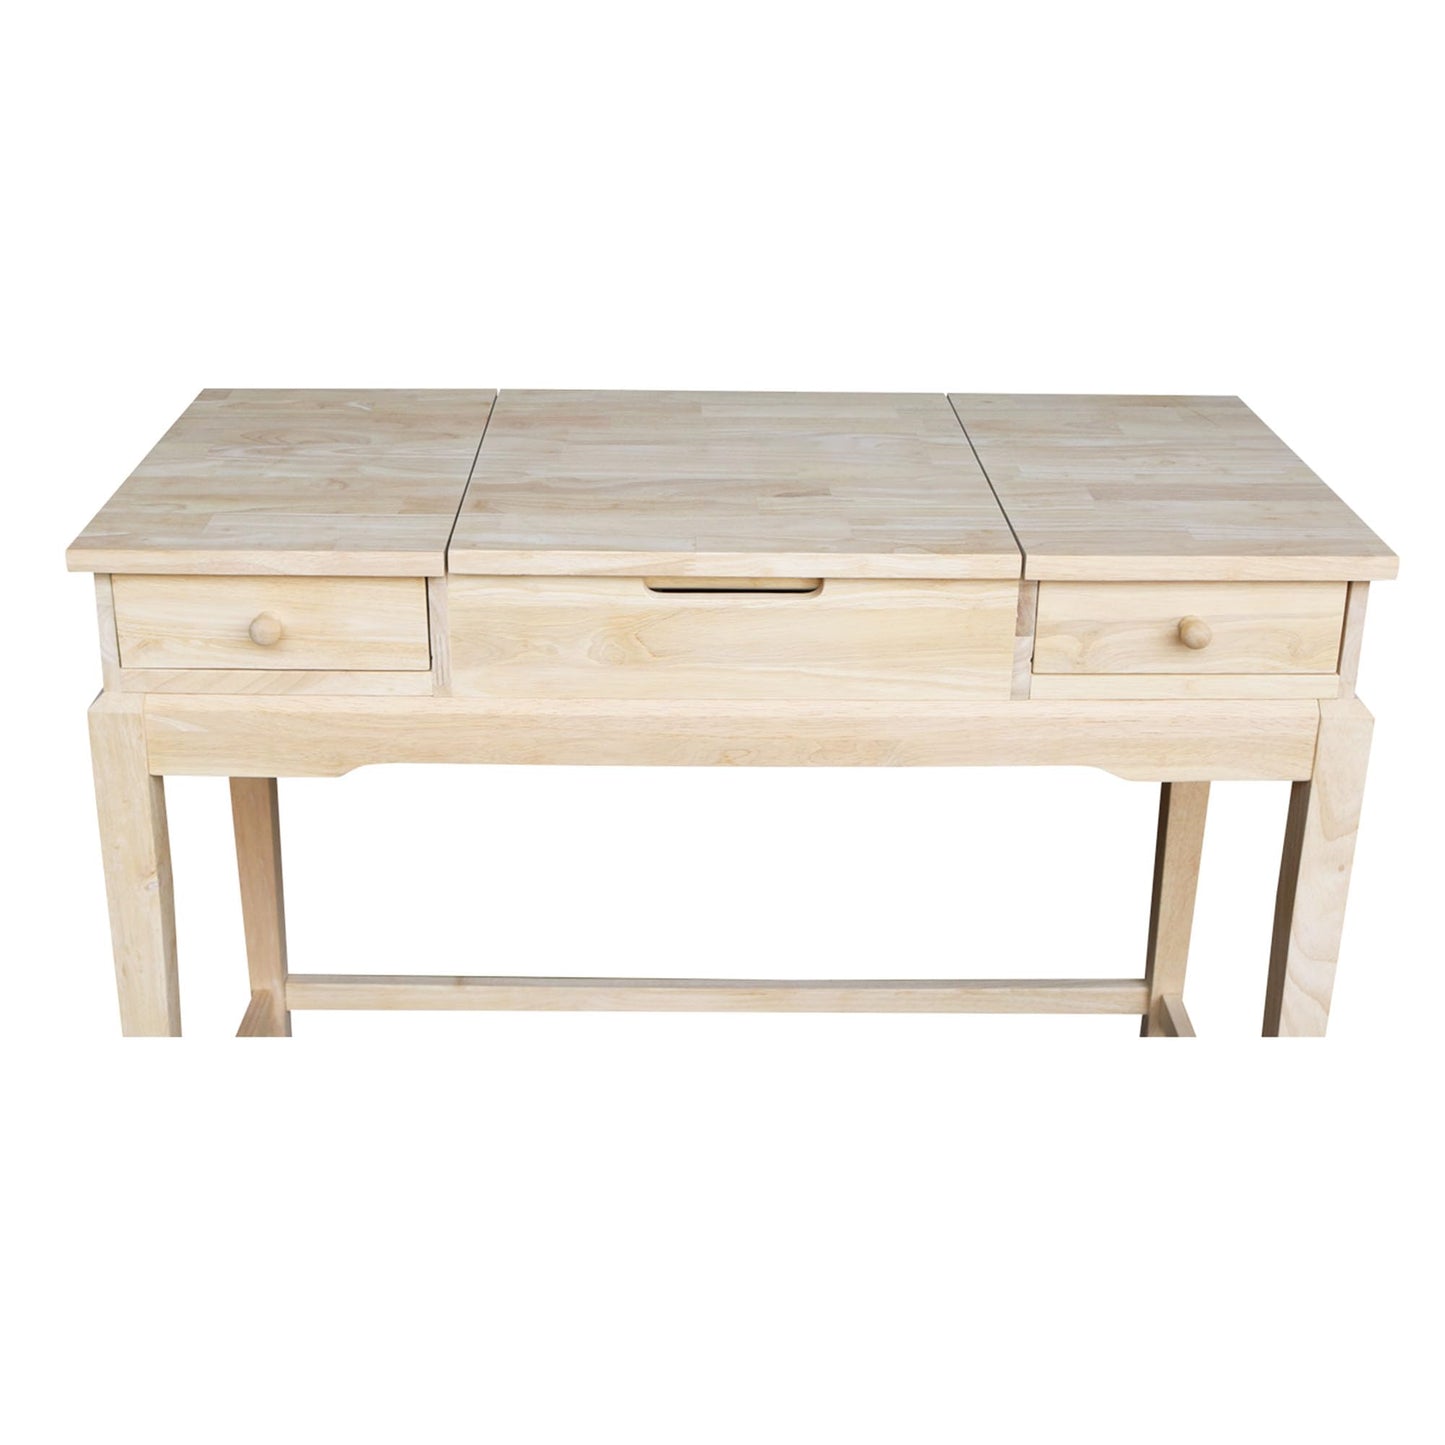 IC International Concepts Vanity Table, Unfinished